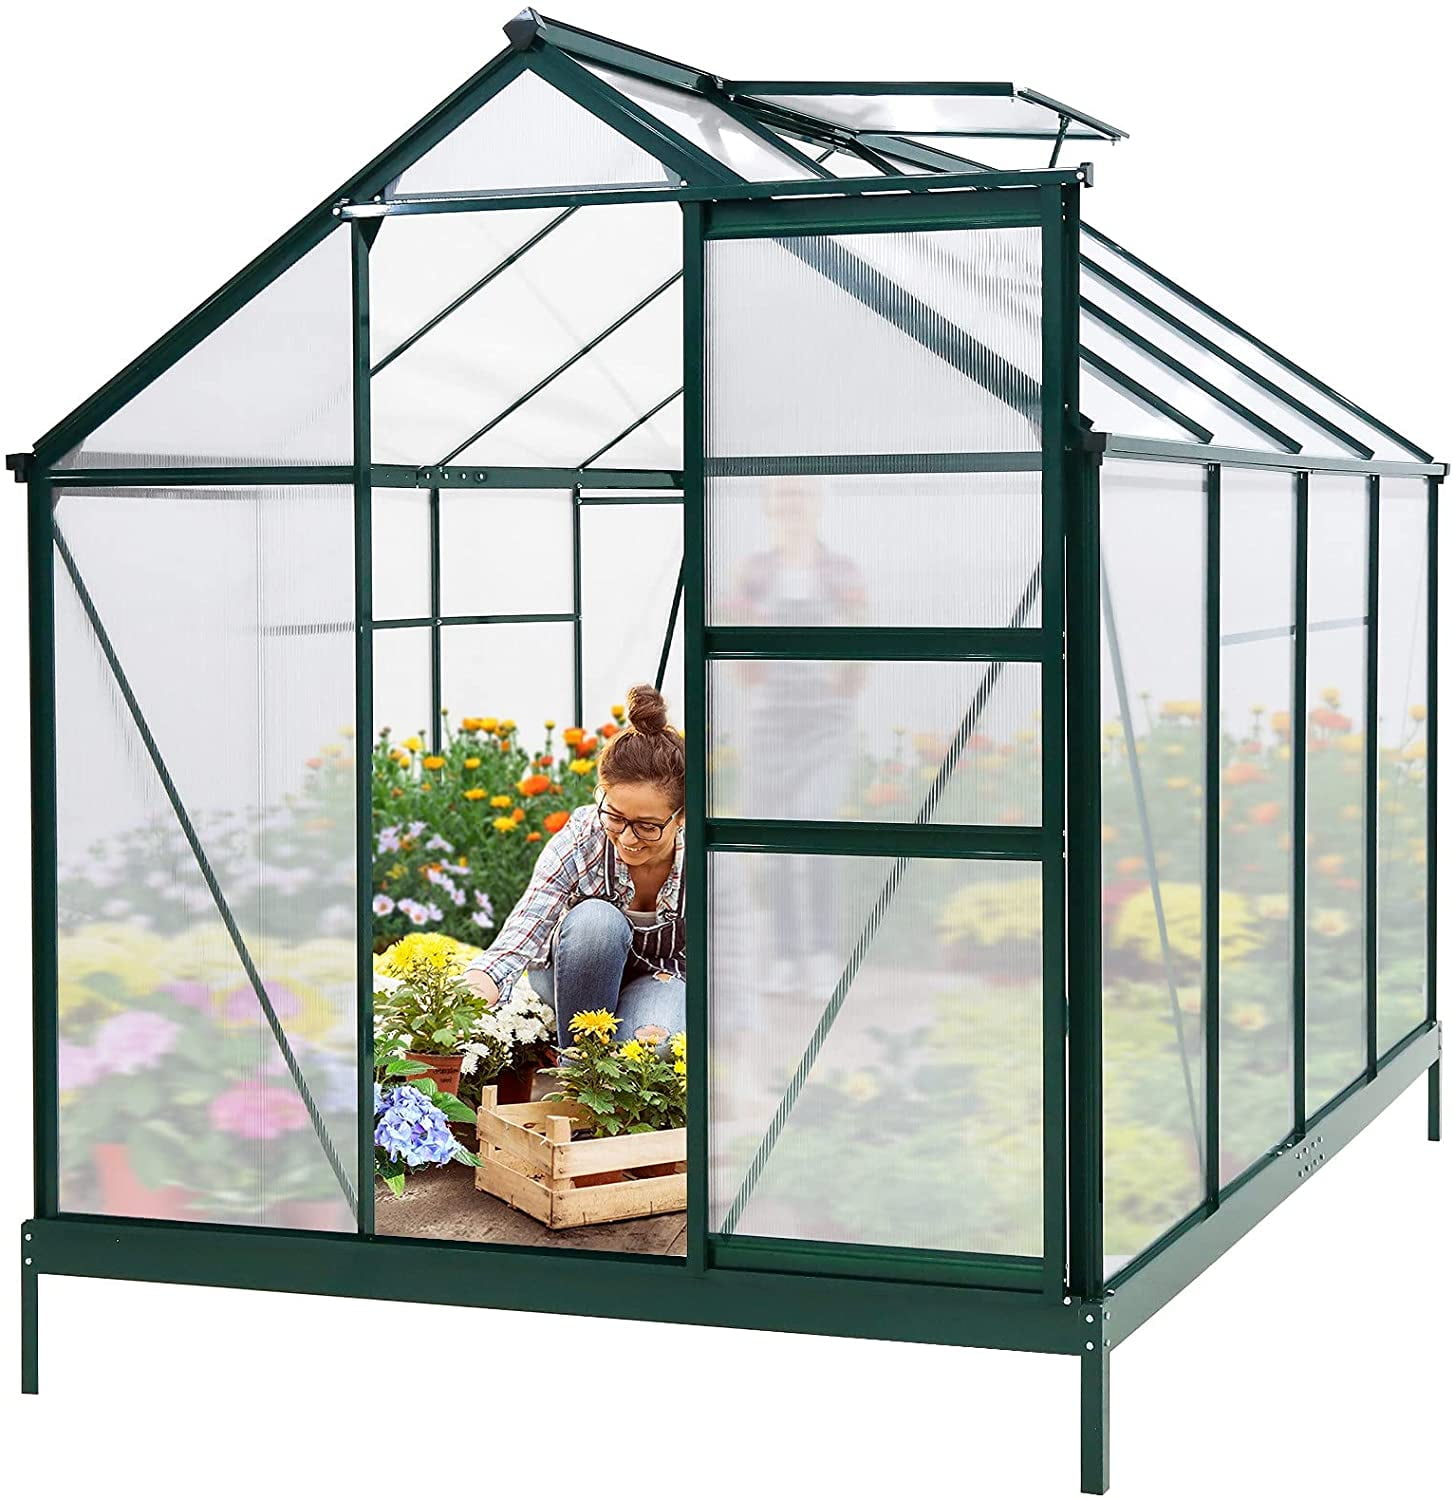 x 36 in Greenhouse 4 ft x 4 ft Extendable Steel Frame with Zippered Windows 